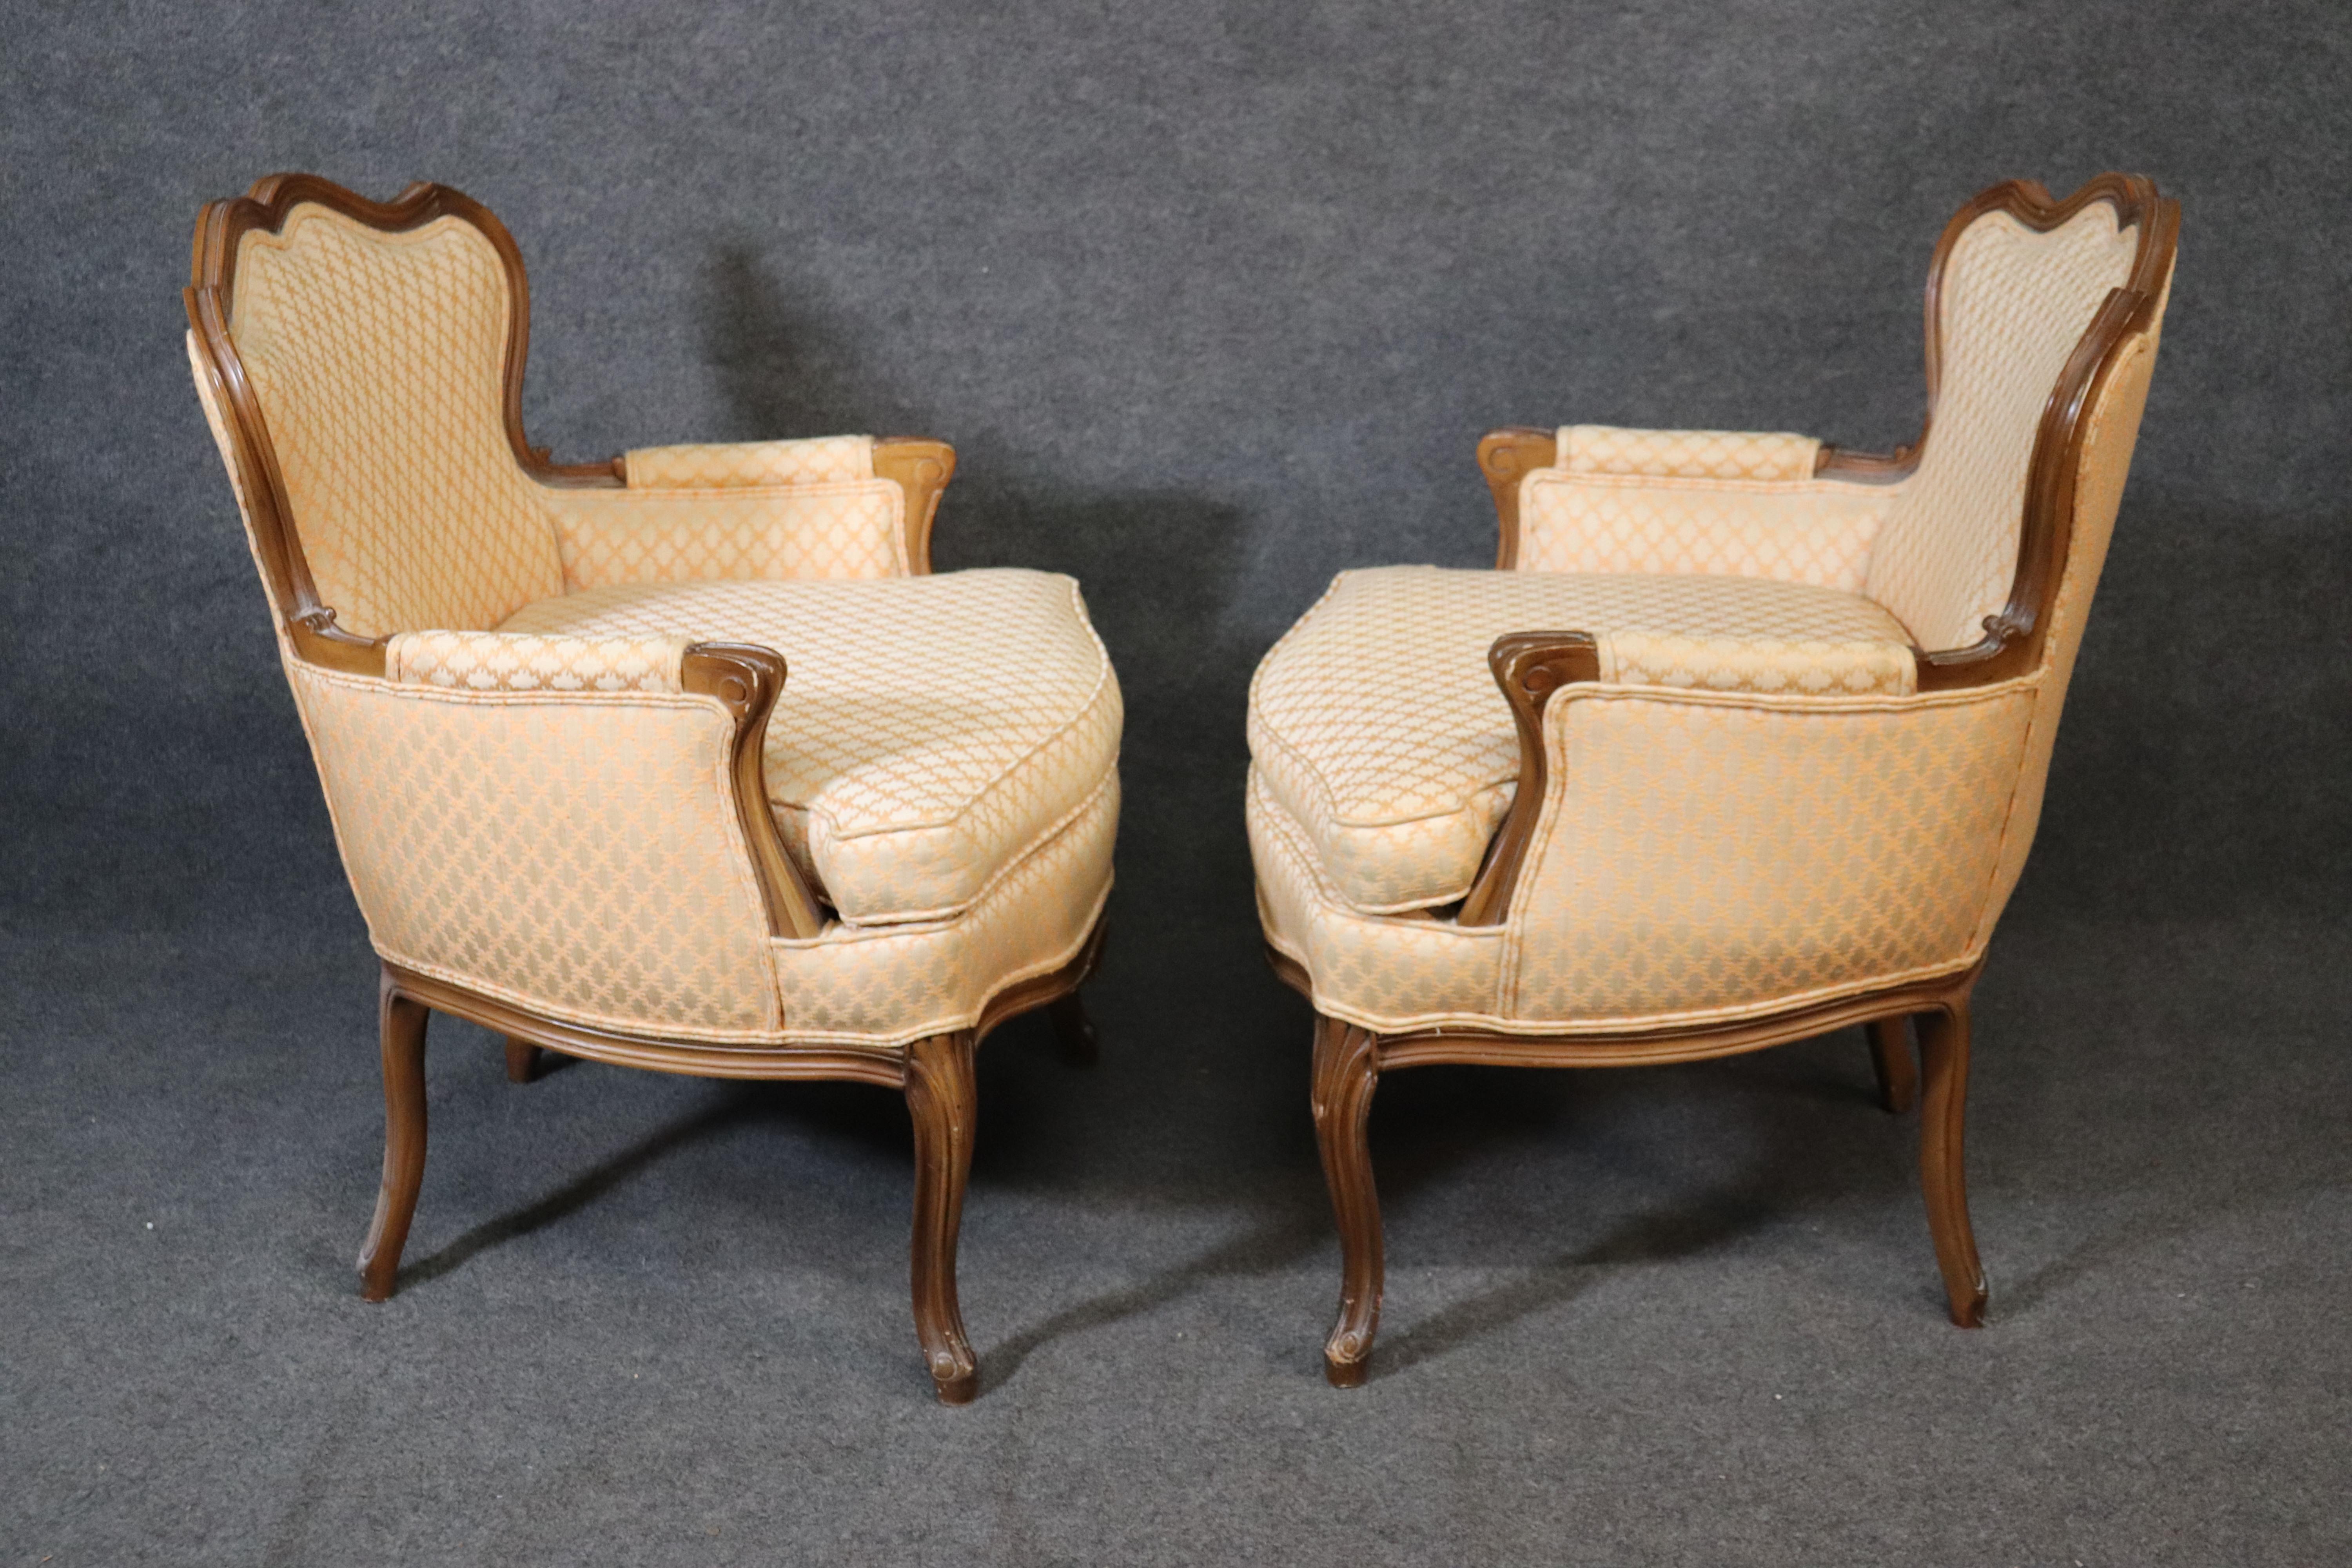 This is a beautiful paid of vintage 1950s American made French bergère chairs in good condition. The measures: 36 tall x 27 wide x 28 deep x seat height 20 inches.